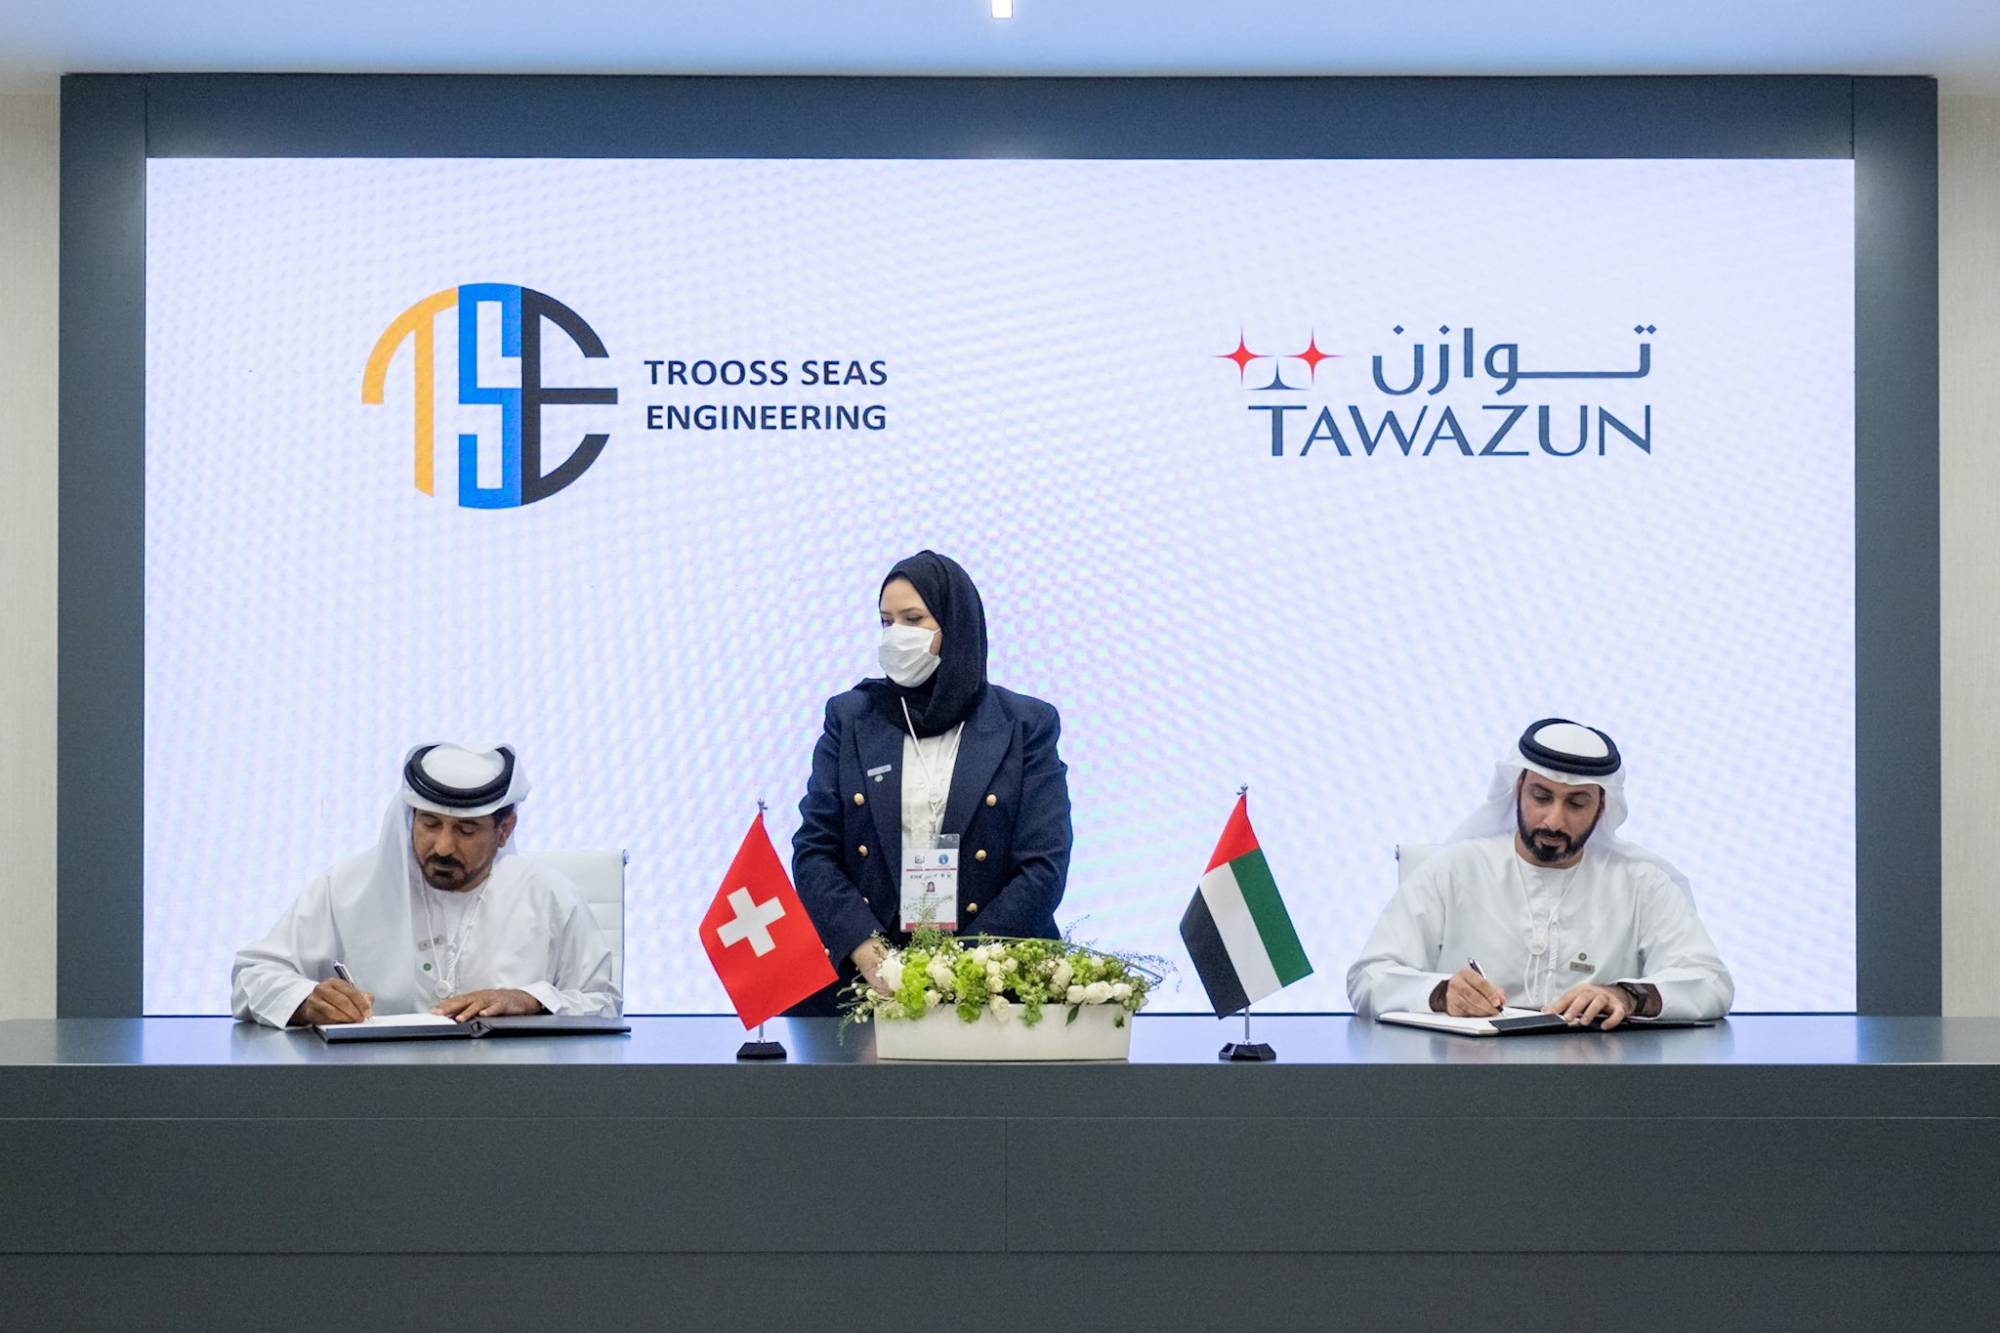 Tawazun provides support to TROOSS SEAS Engineering groundbreaking air-to-water project